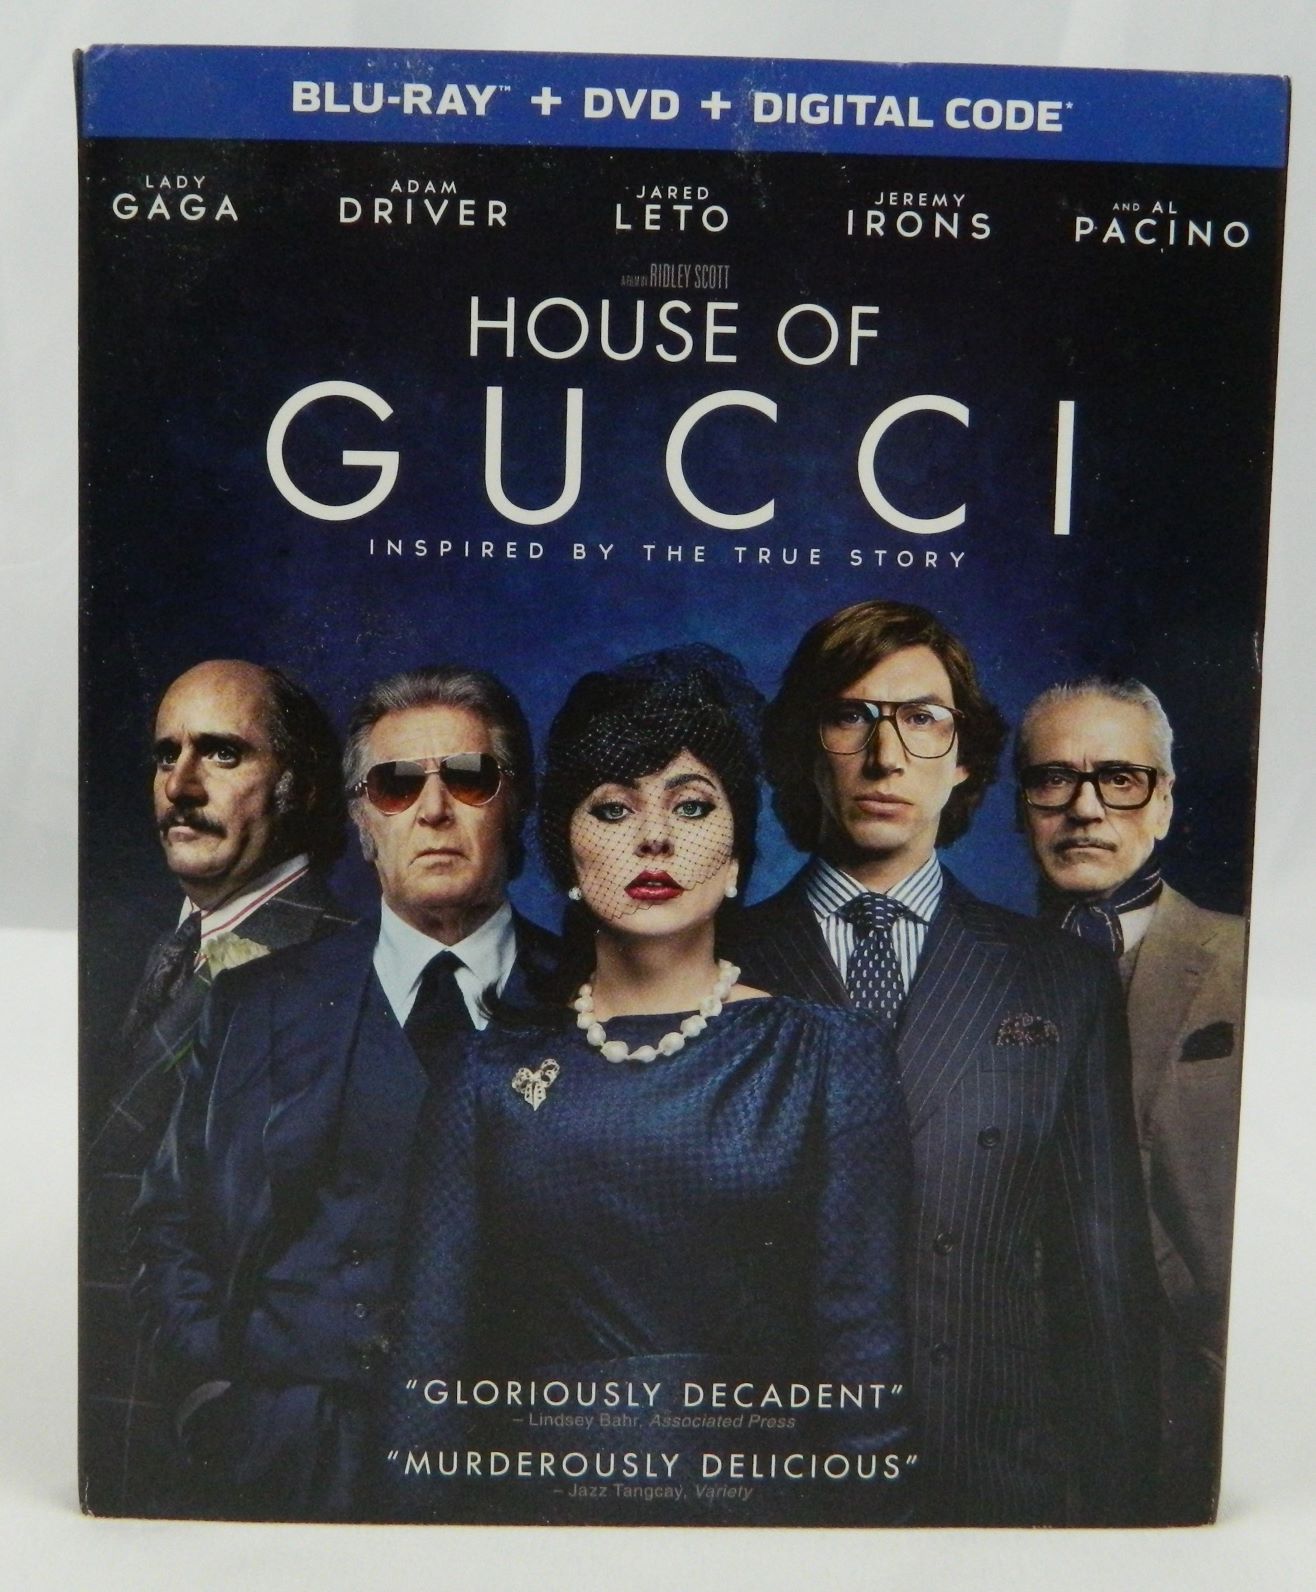 House of Gucci Blu-ray